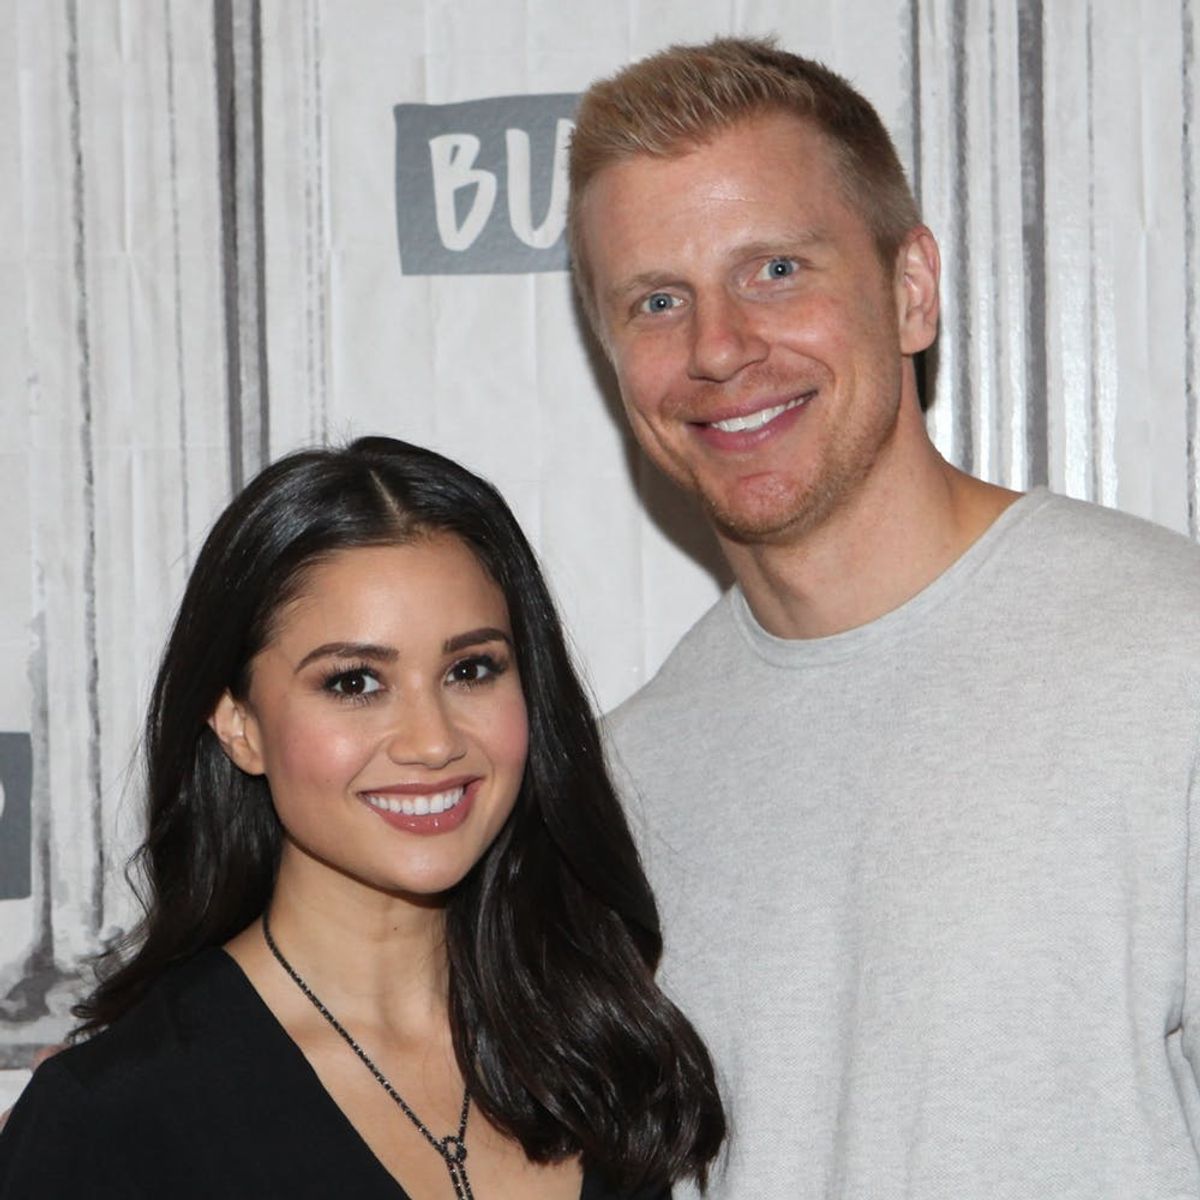 The Bachelor’s Sean Lowe and Catherine Giudici Just Welcomed a Baby Boy — Find Out His Name!